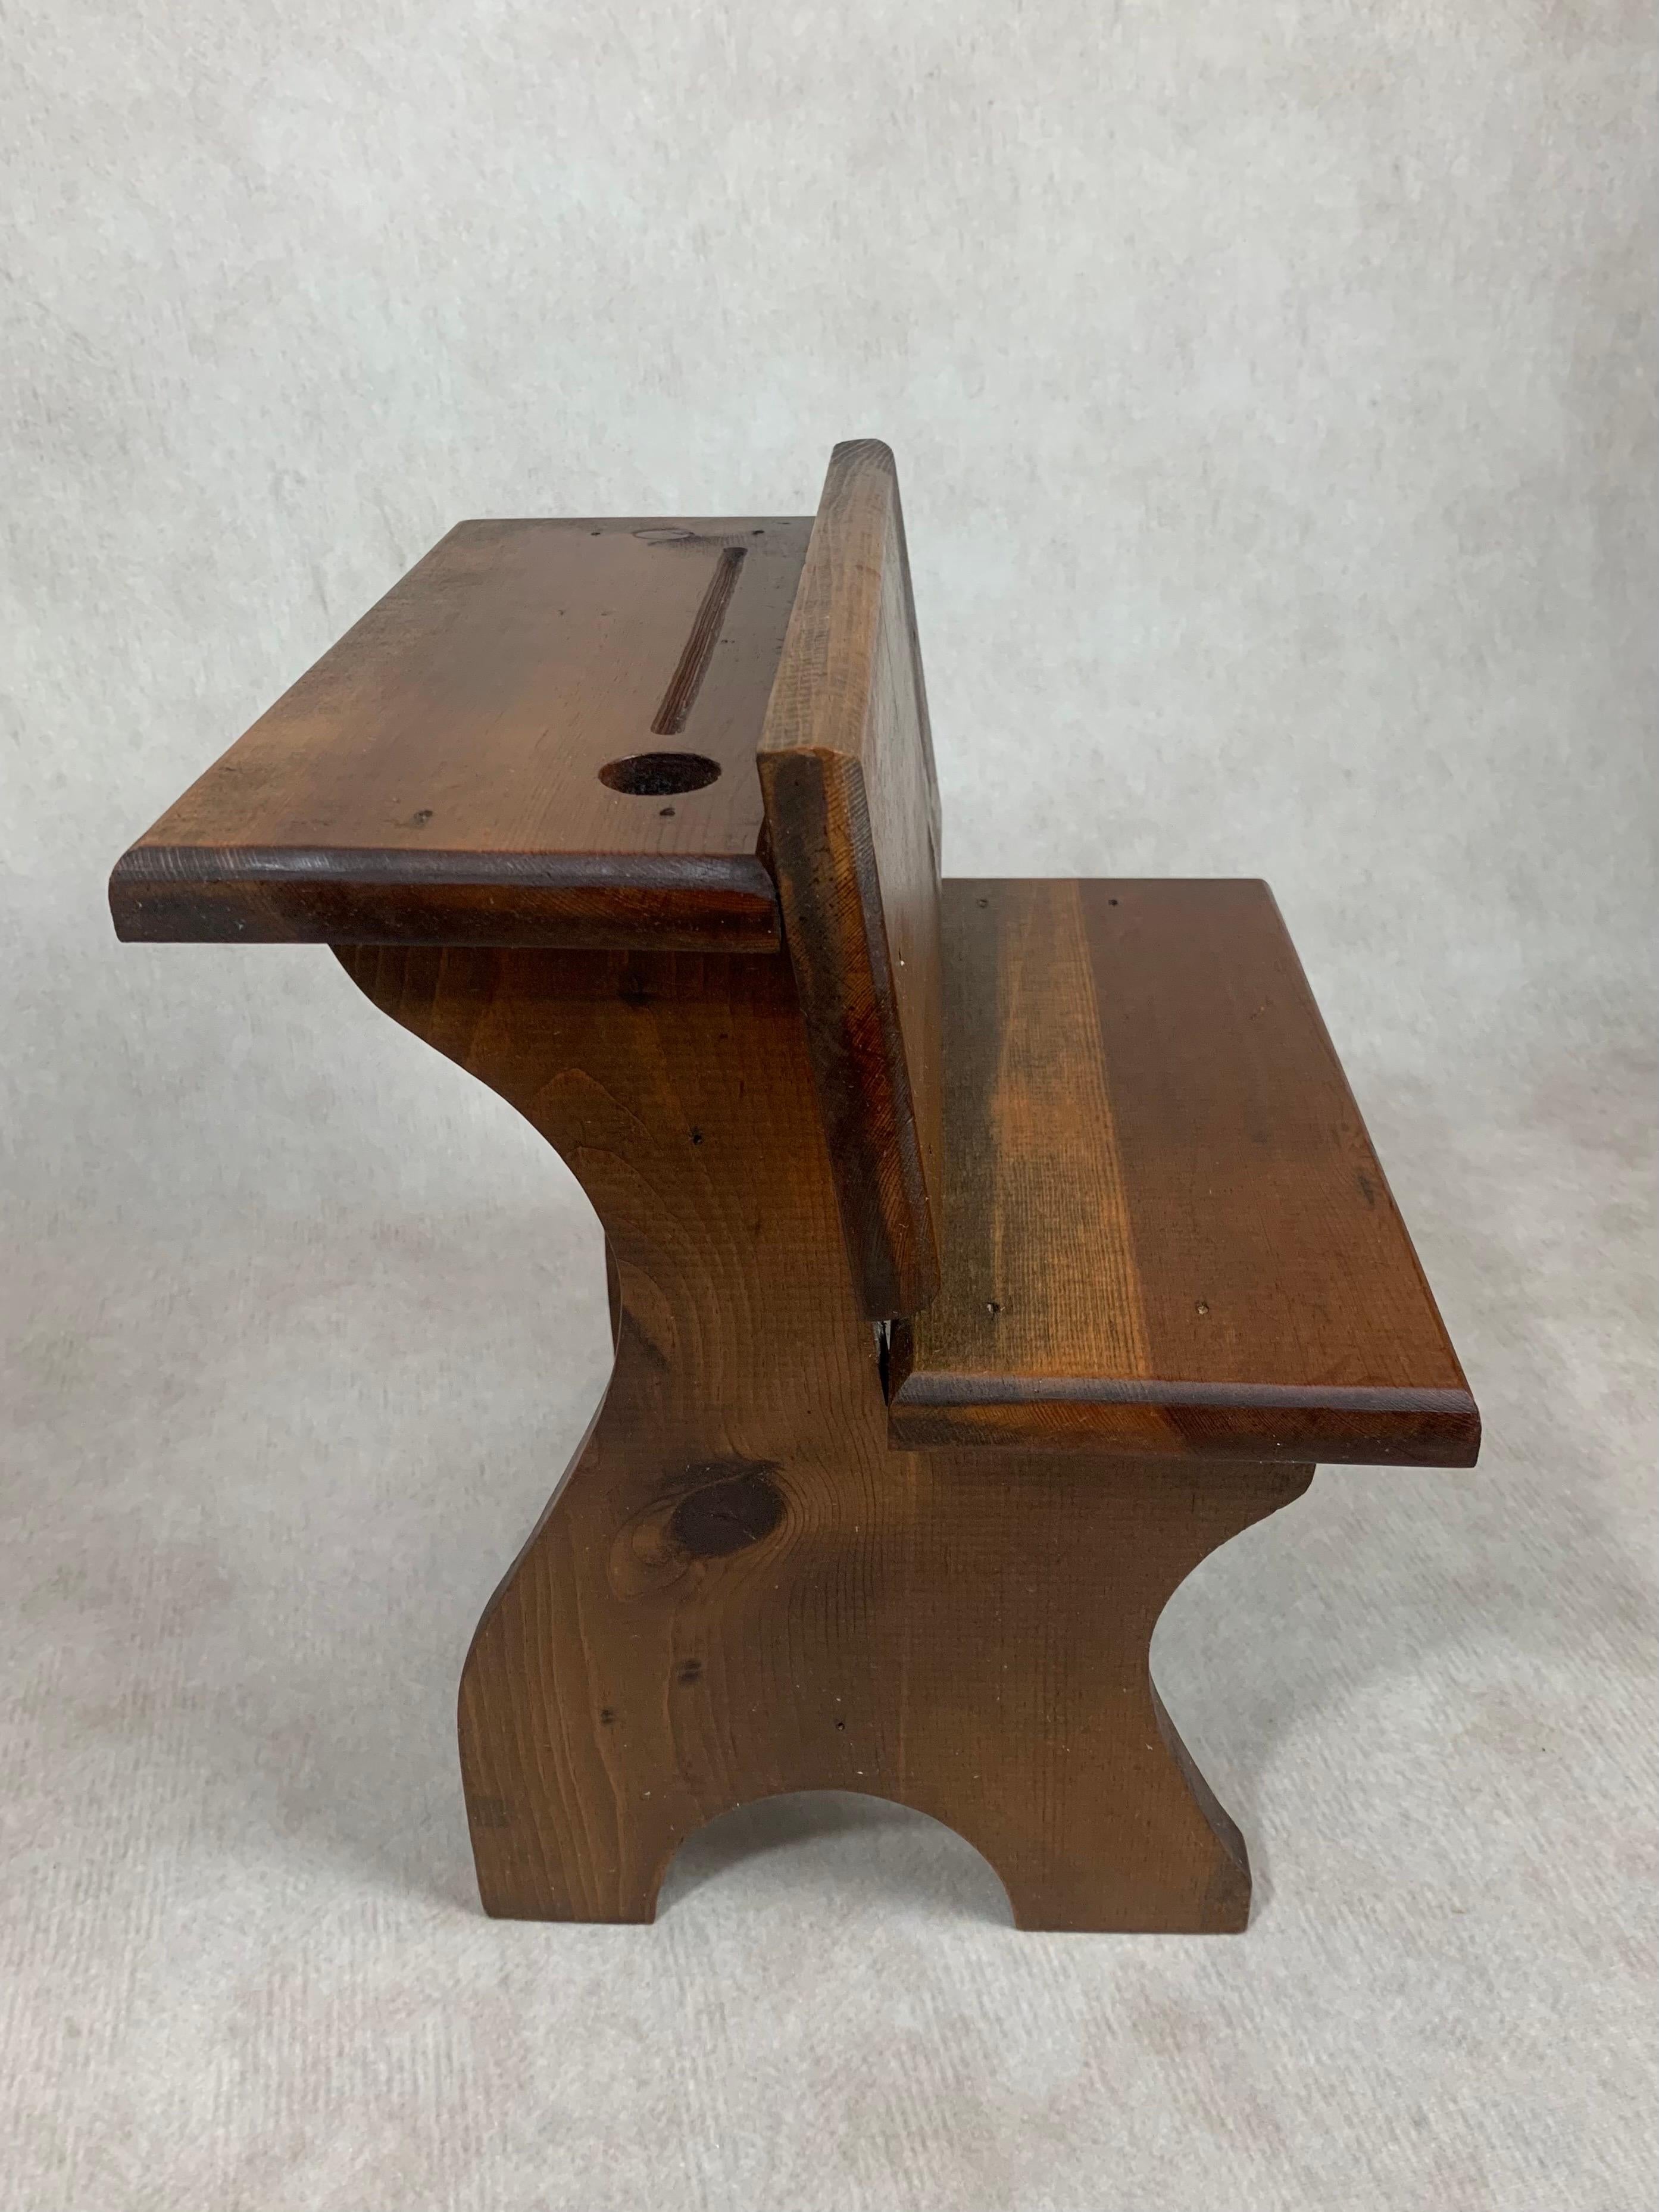 Handmade in Lancaster, Pennsylvania circa 1940 of native pine. An adorable replica of what was typically found in school houses throughout colonial times. 

In good condition with minor wear commensurate with age and normal use. Sturdy and built to